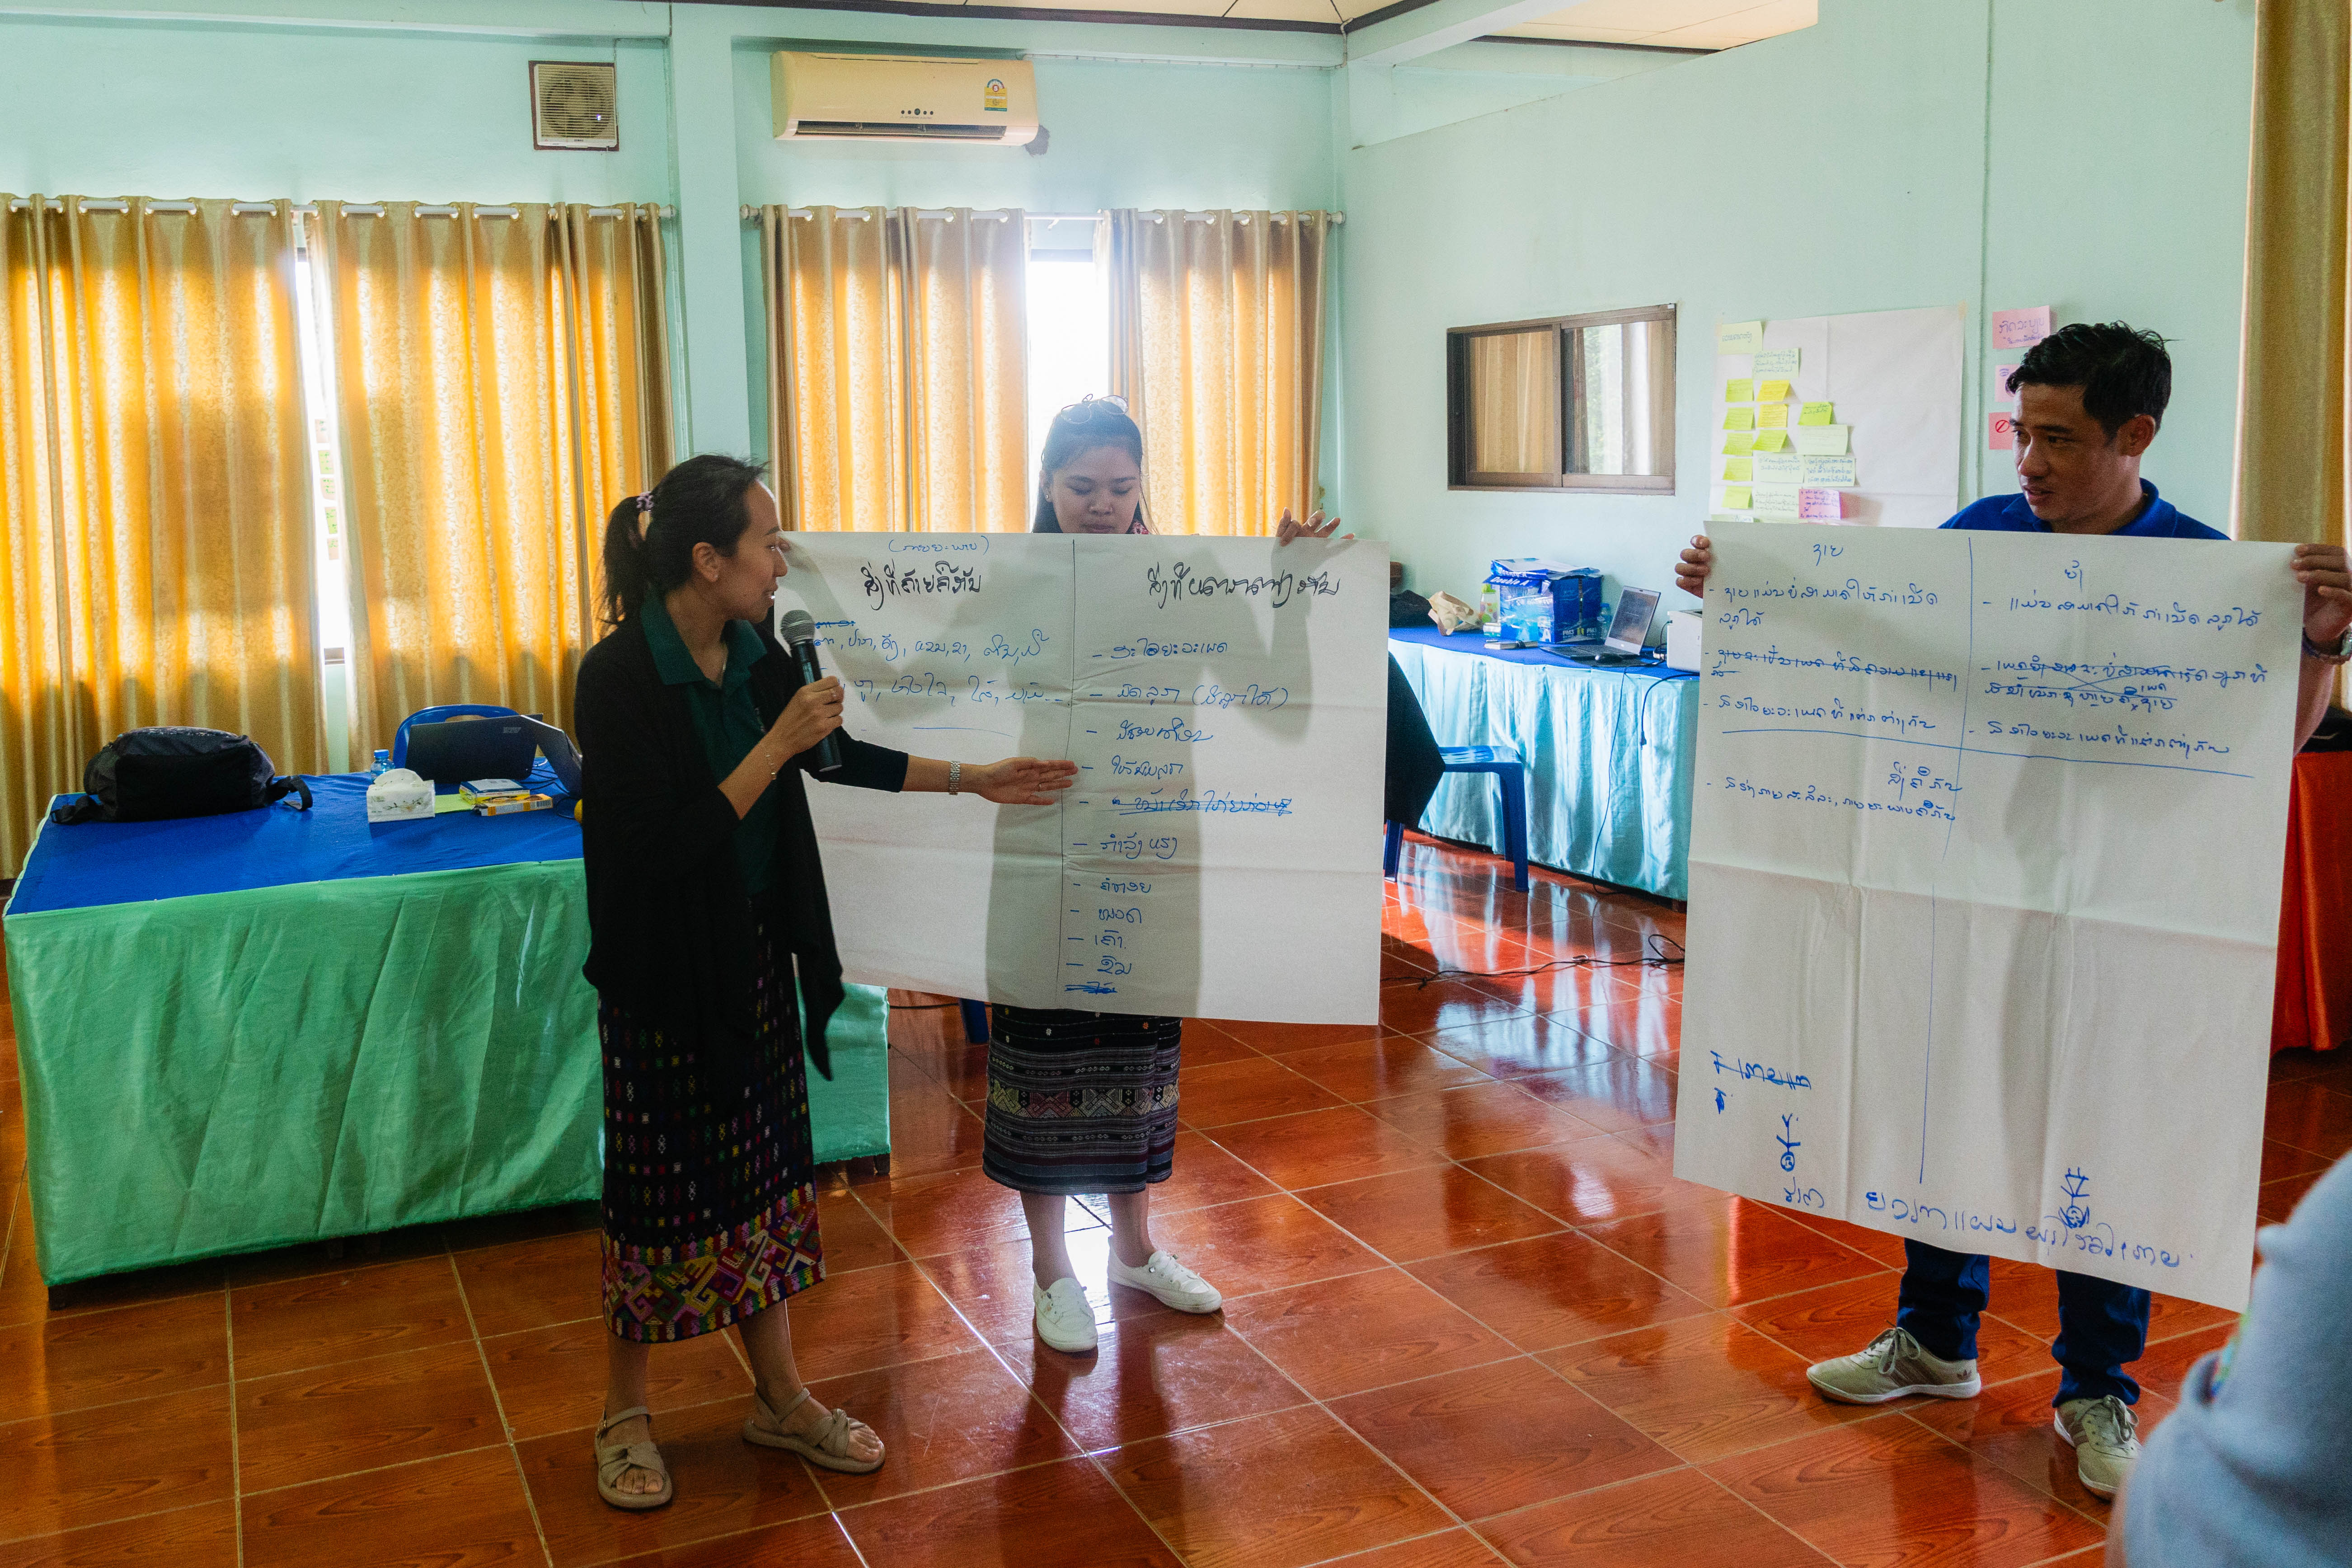 RECOFTC Lao PDR's training officer, Souphaline Soulyavong, summarizes the group discussion that compared the roles of men and women in forest fire management